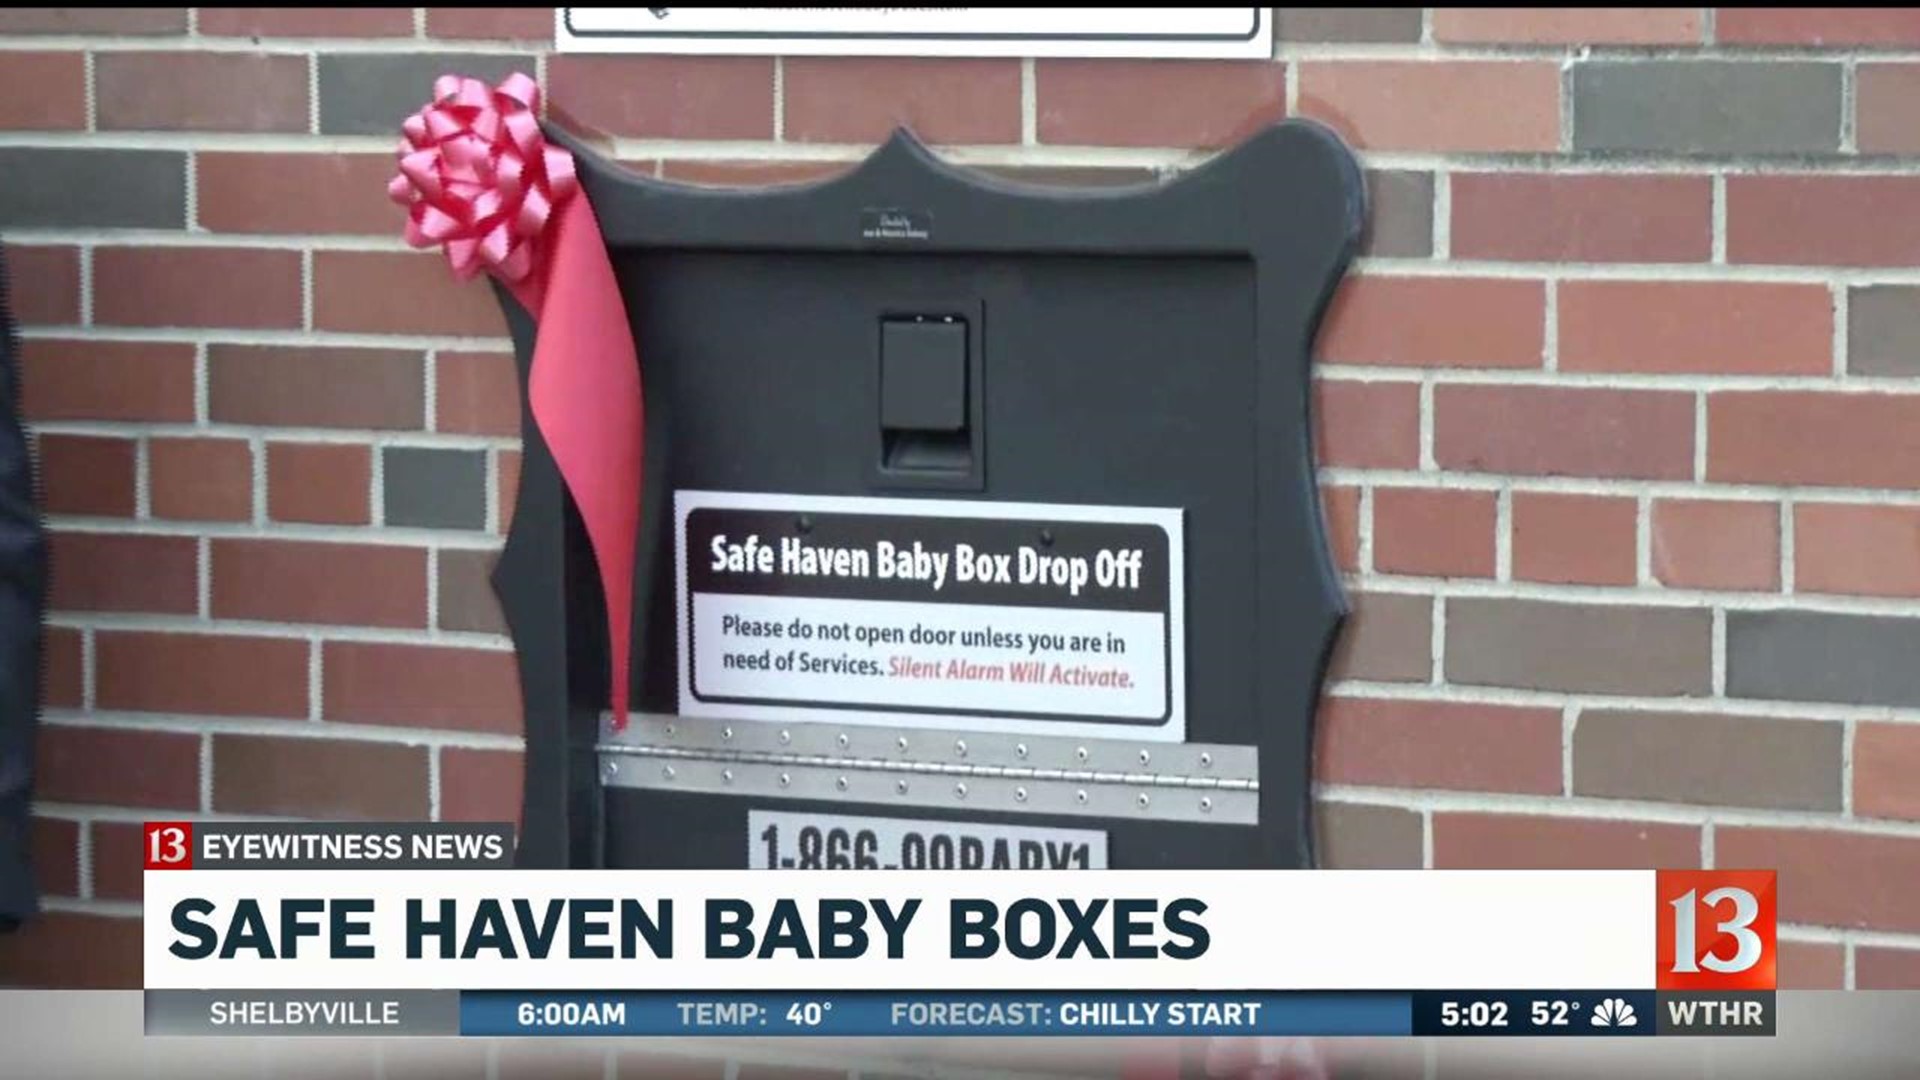 Safe Haven Baby Boxes